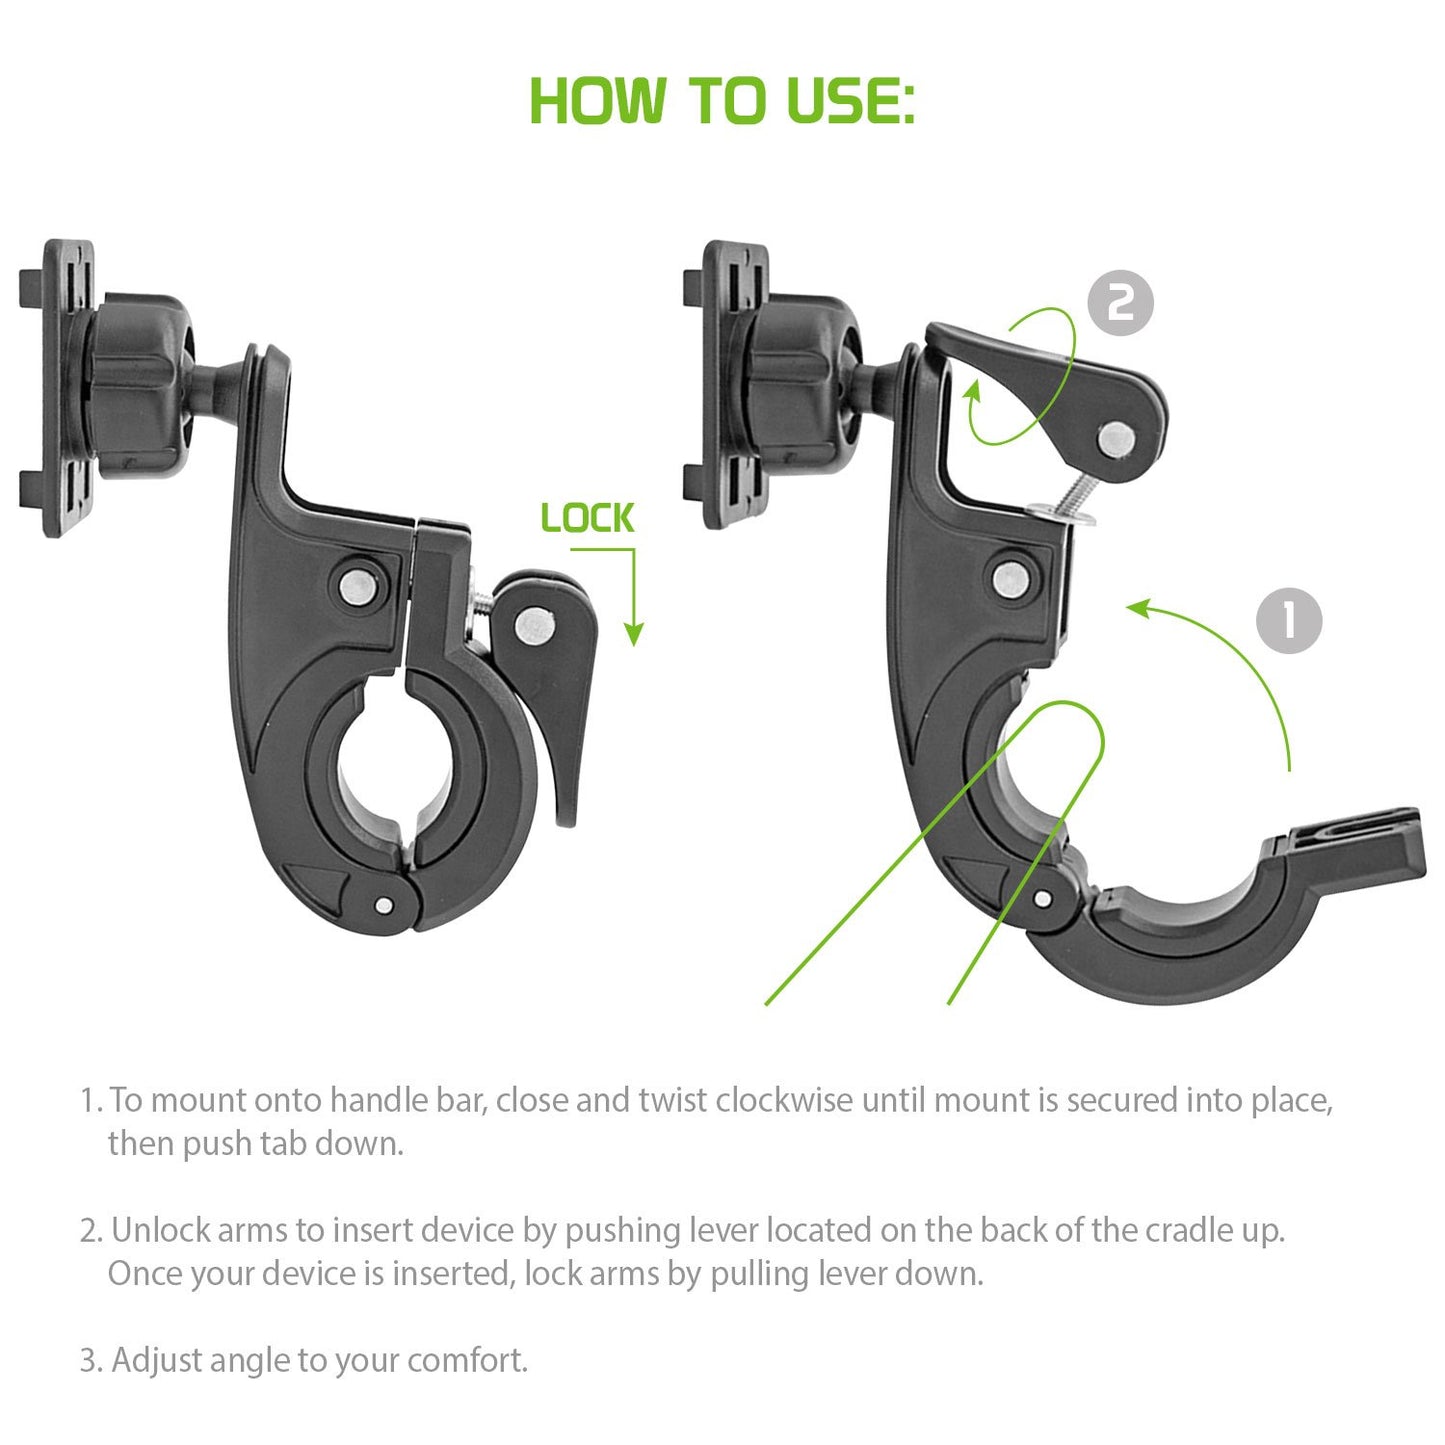 PHBIKE10 - Bike Smartphone Mount, Universal Heavy Duty Bicycle Holder Mount With 360 Degree Rotation Compatible to iPhone and all Smartphones